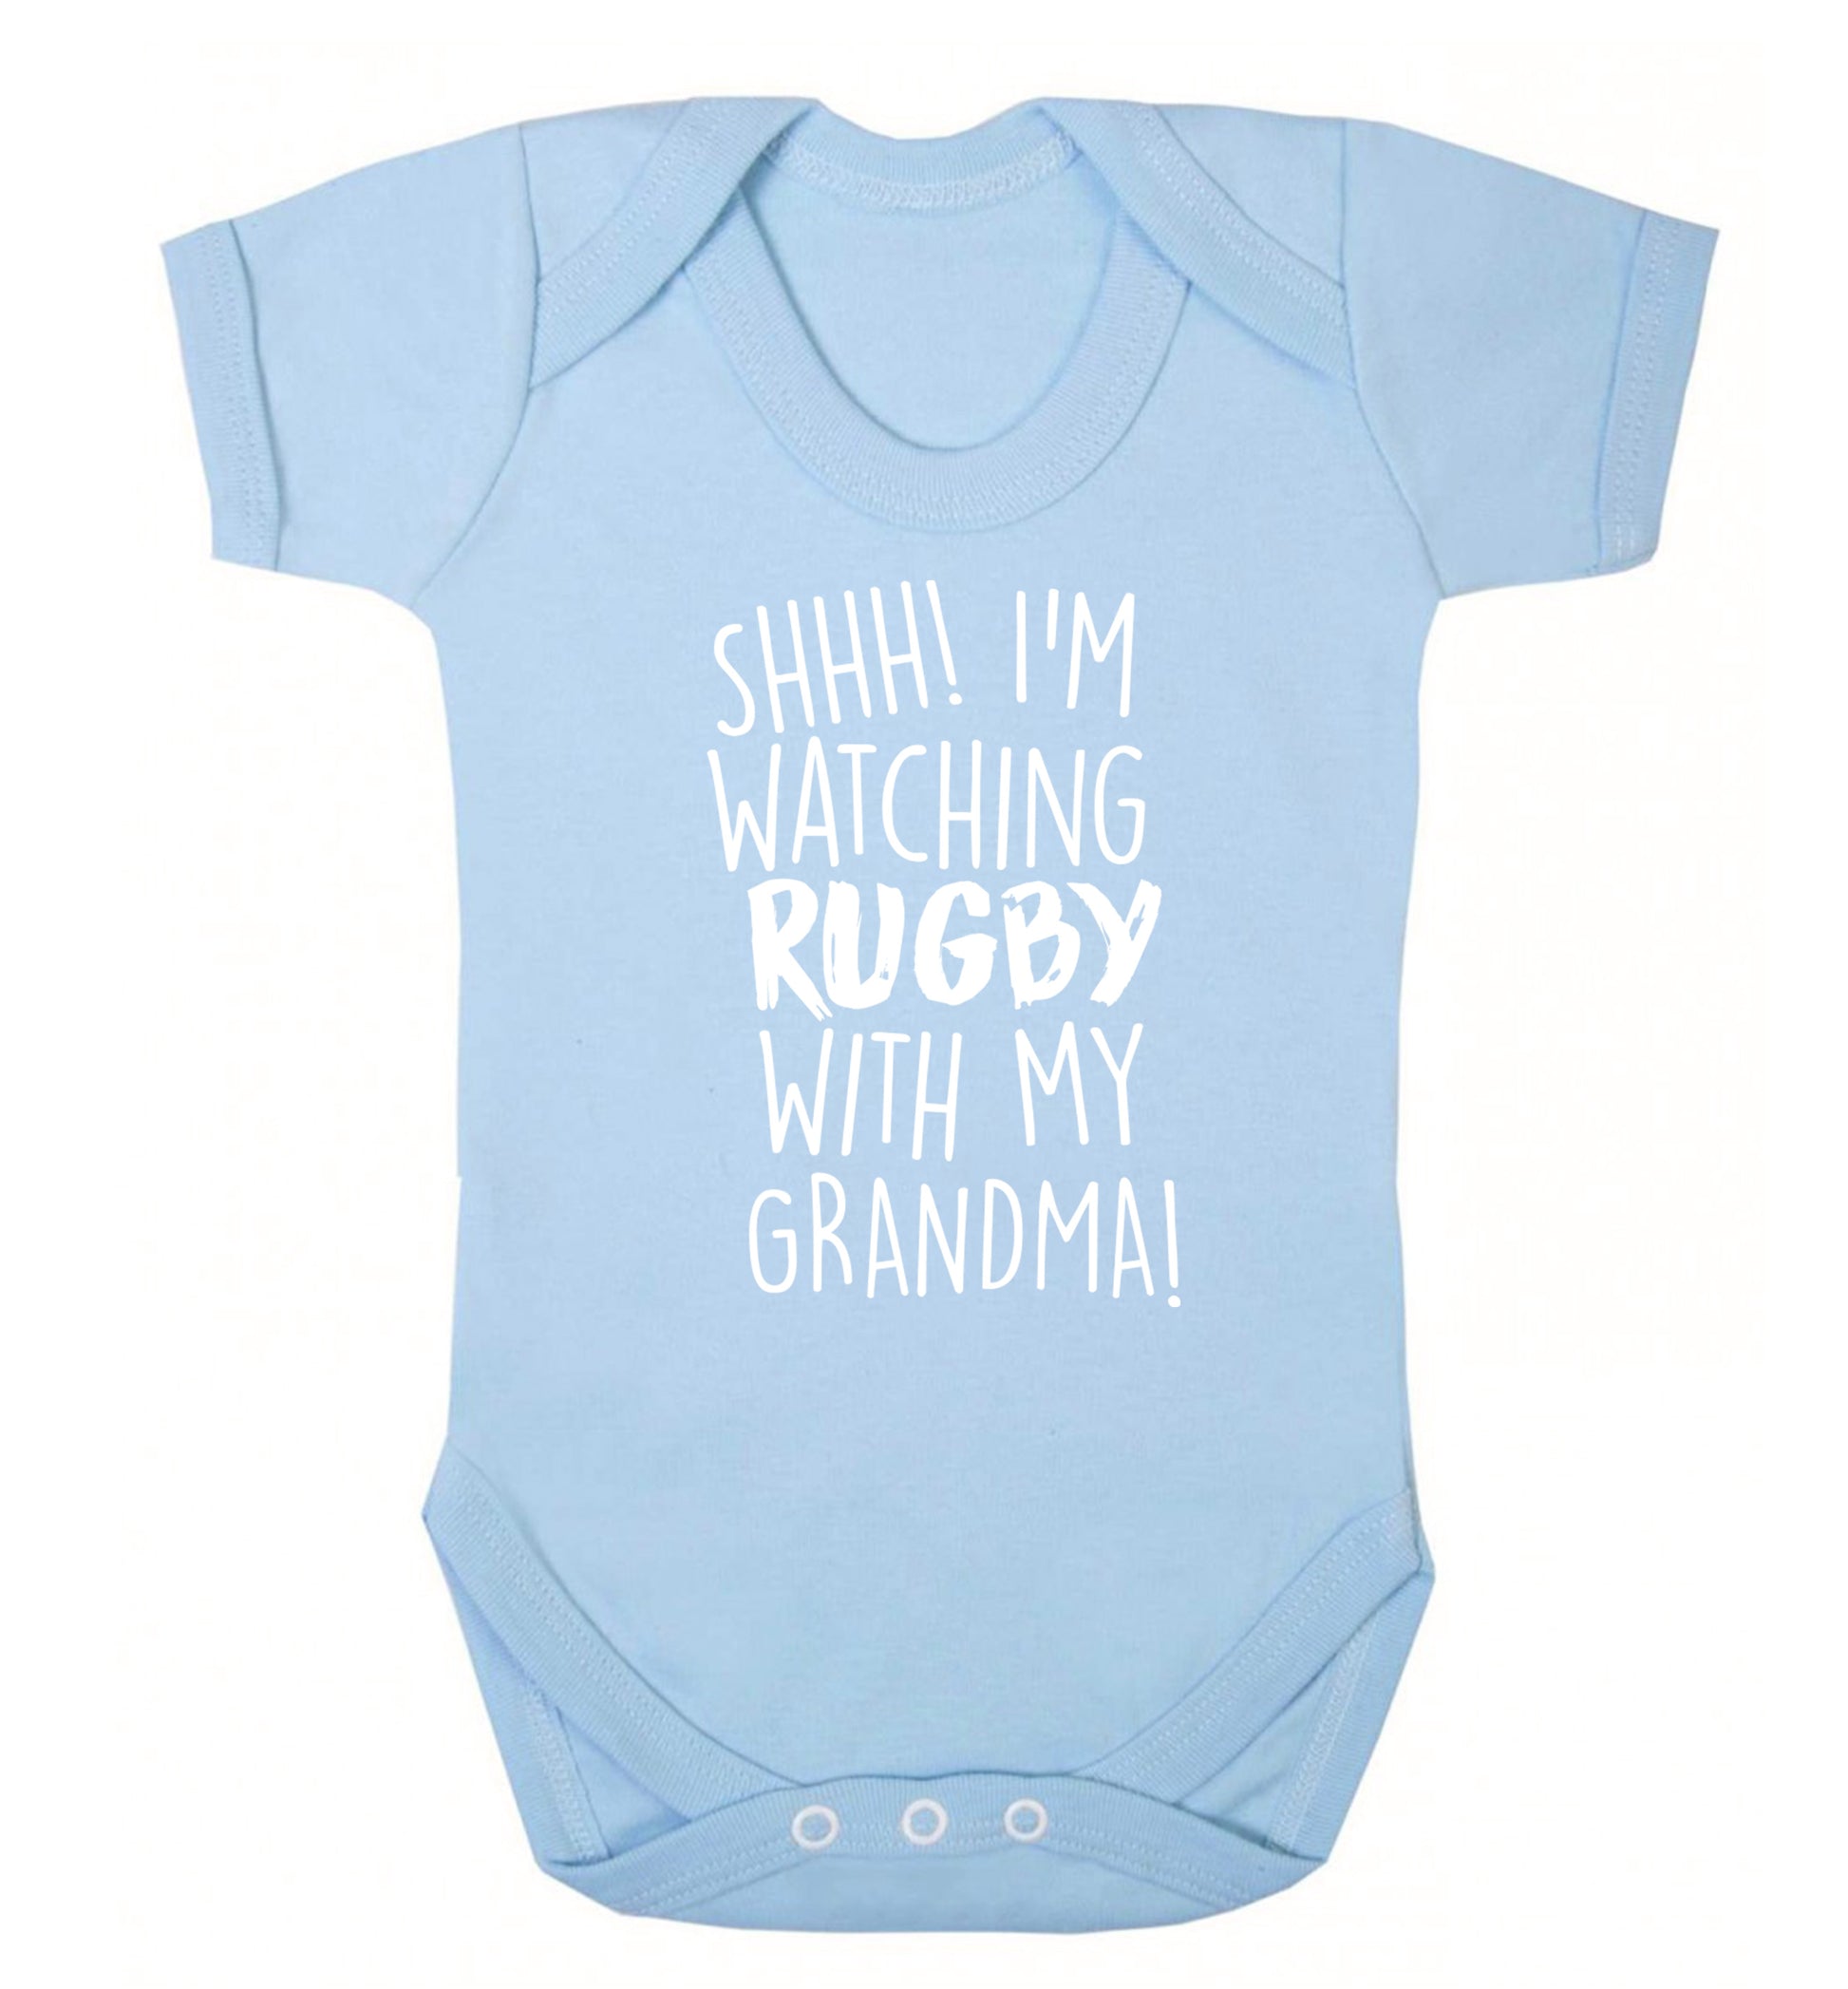 Shh I'm watching rugby with my grandma Baby Vest pale blue 18-24 months